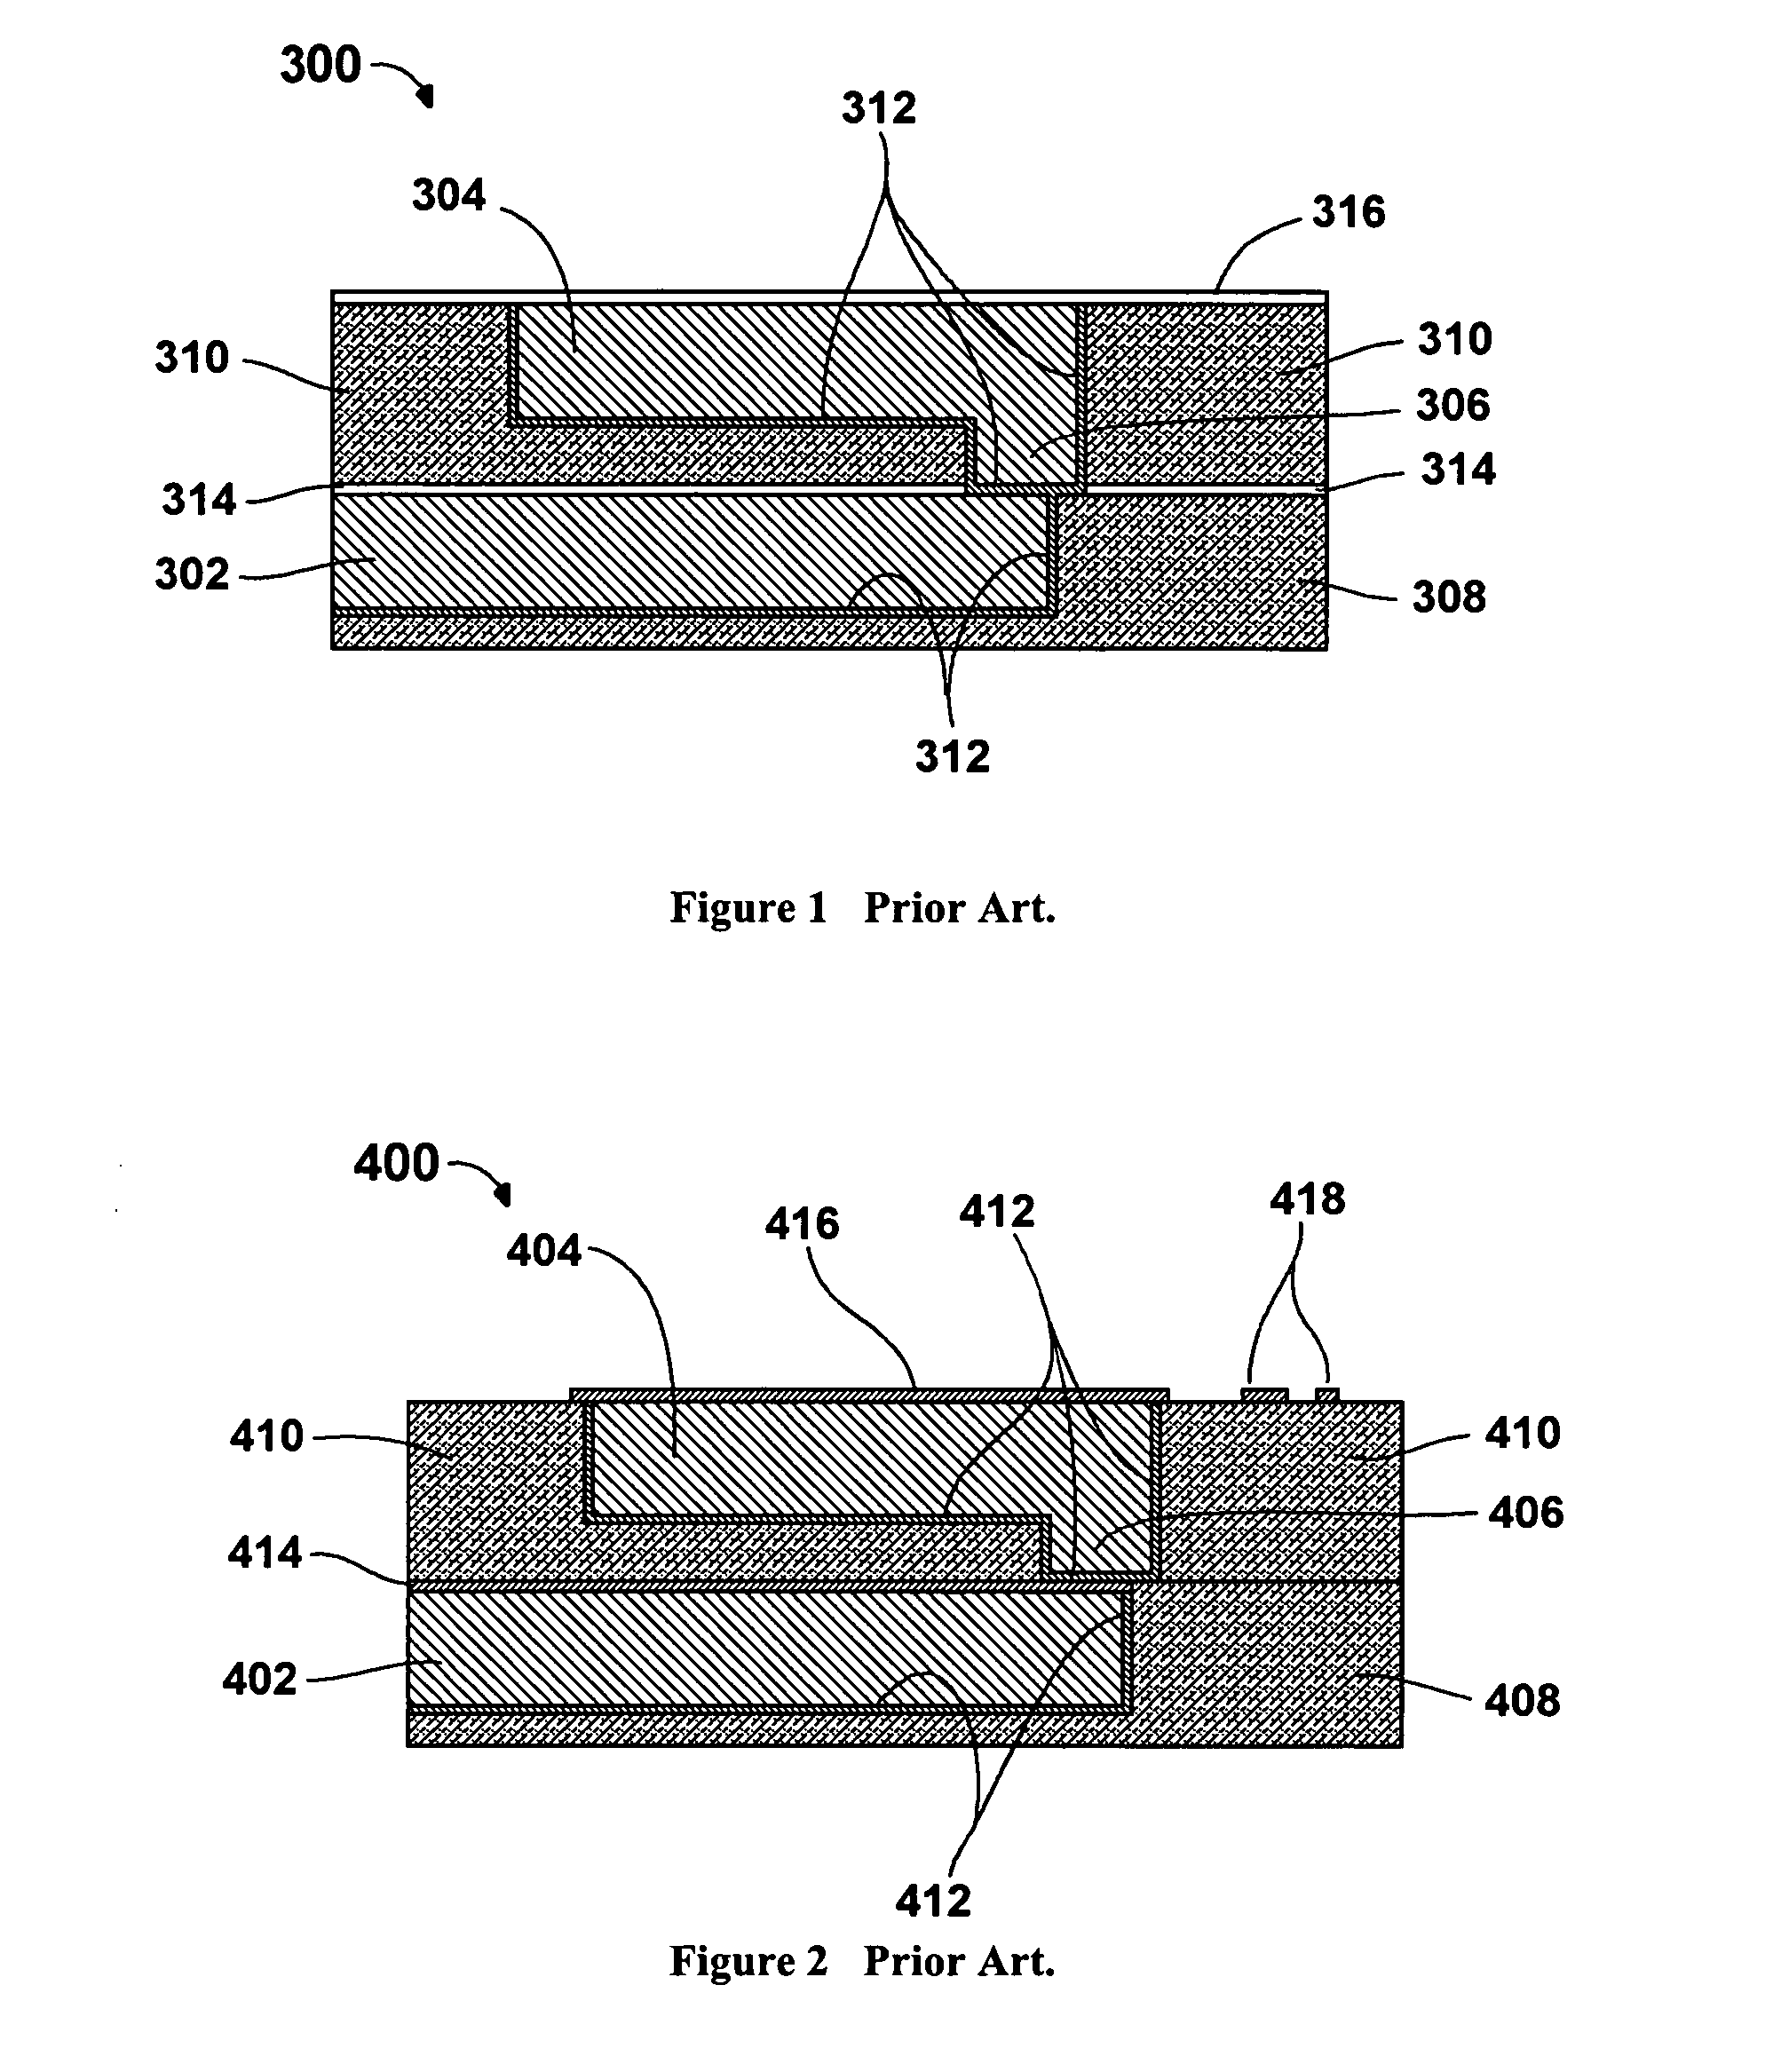 Copper interconnect wiring and method of forming thereof